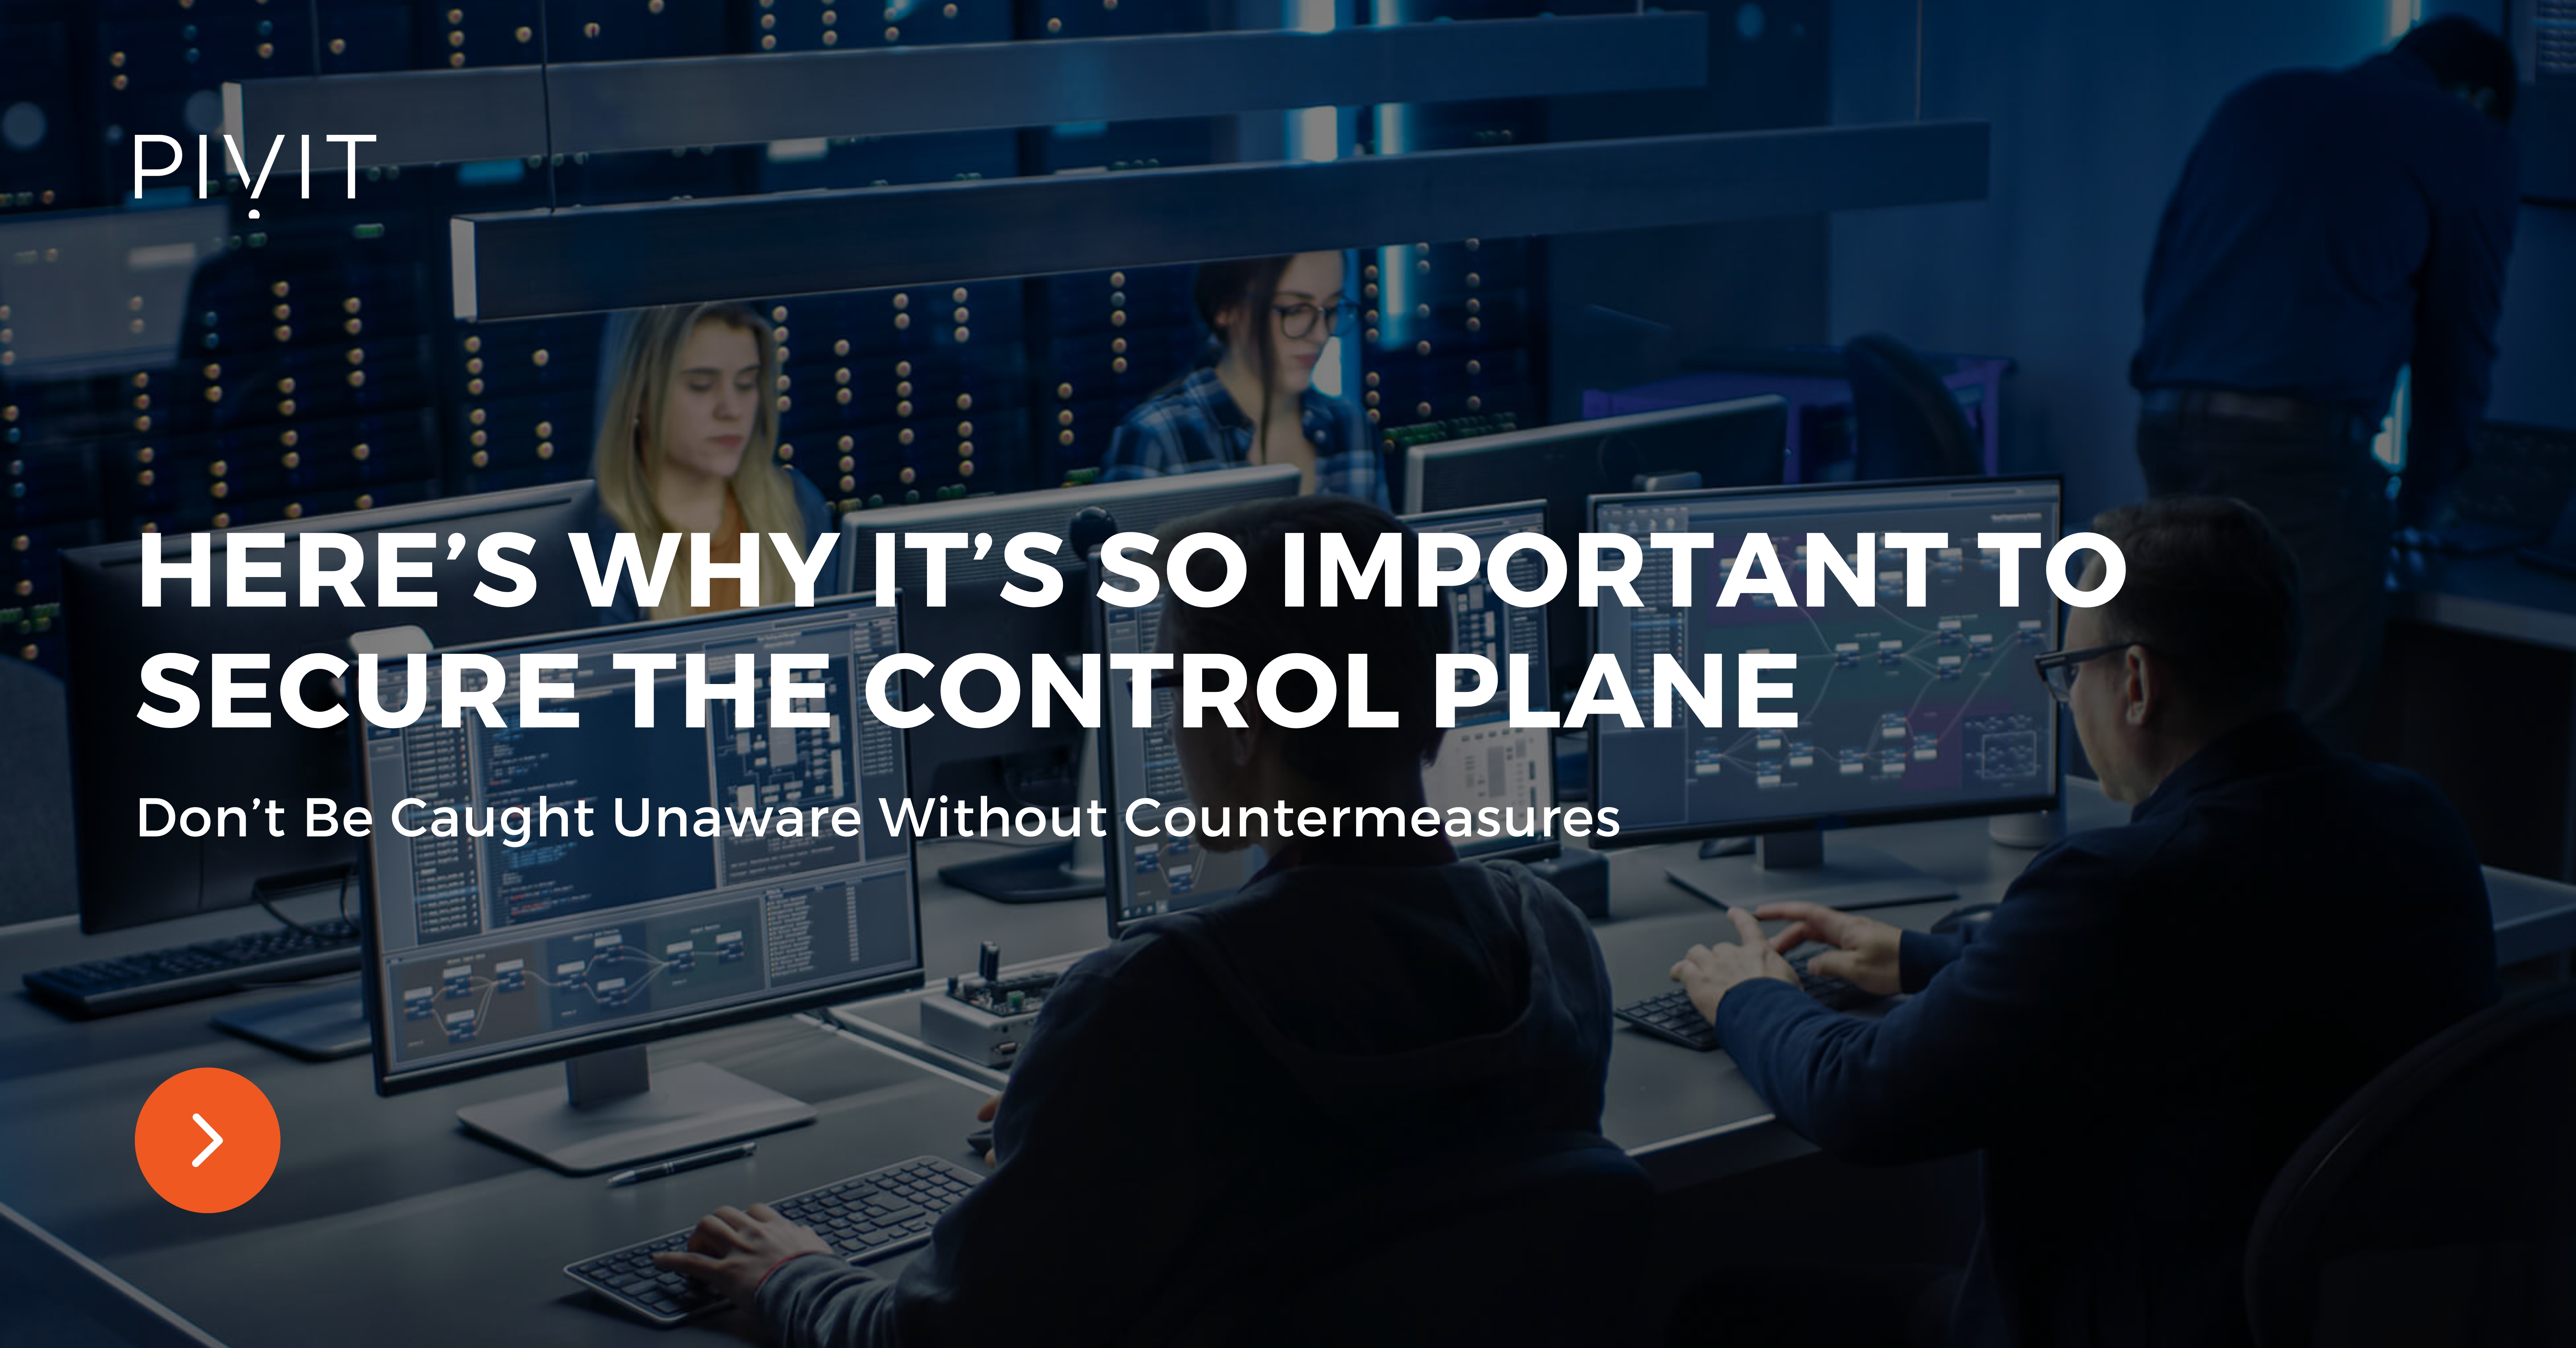 Here’s Why It’s So Important to Secure the Control Plane - Don’t Be Caught Unaware Without Countermeasures